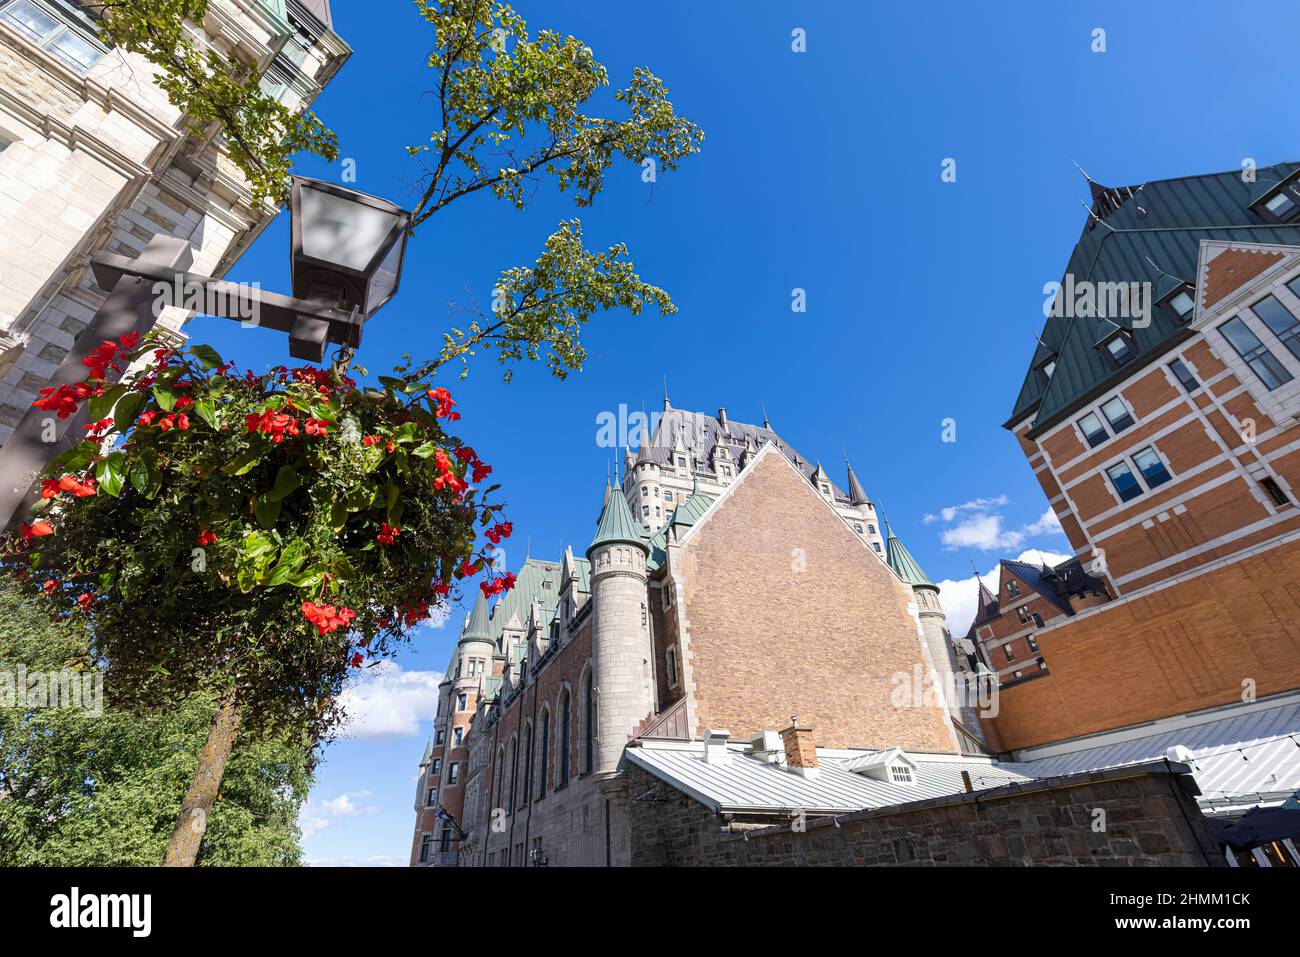 Old Quebec City tourist attractions of the upper town of historic city center with shopping district, cafes and restaurants and old french architecture. Stock Photo